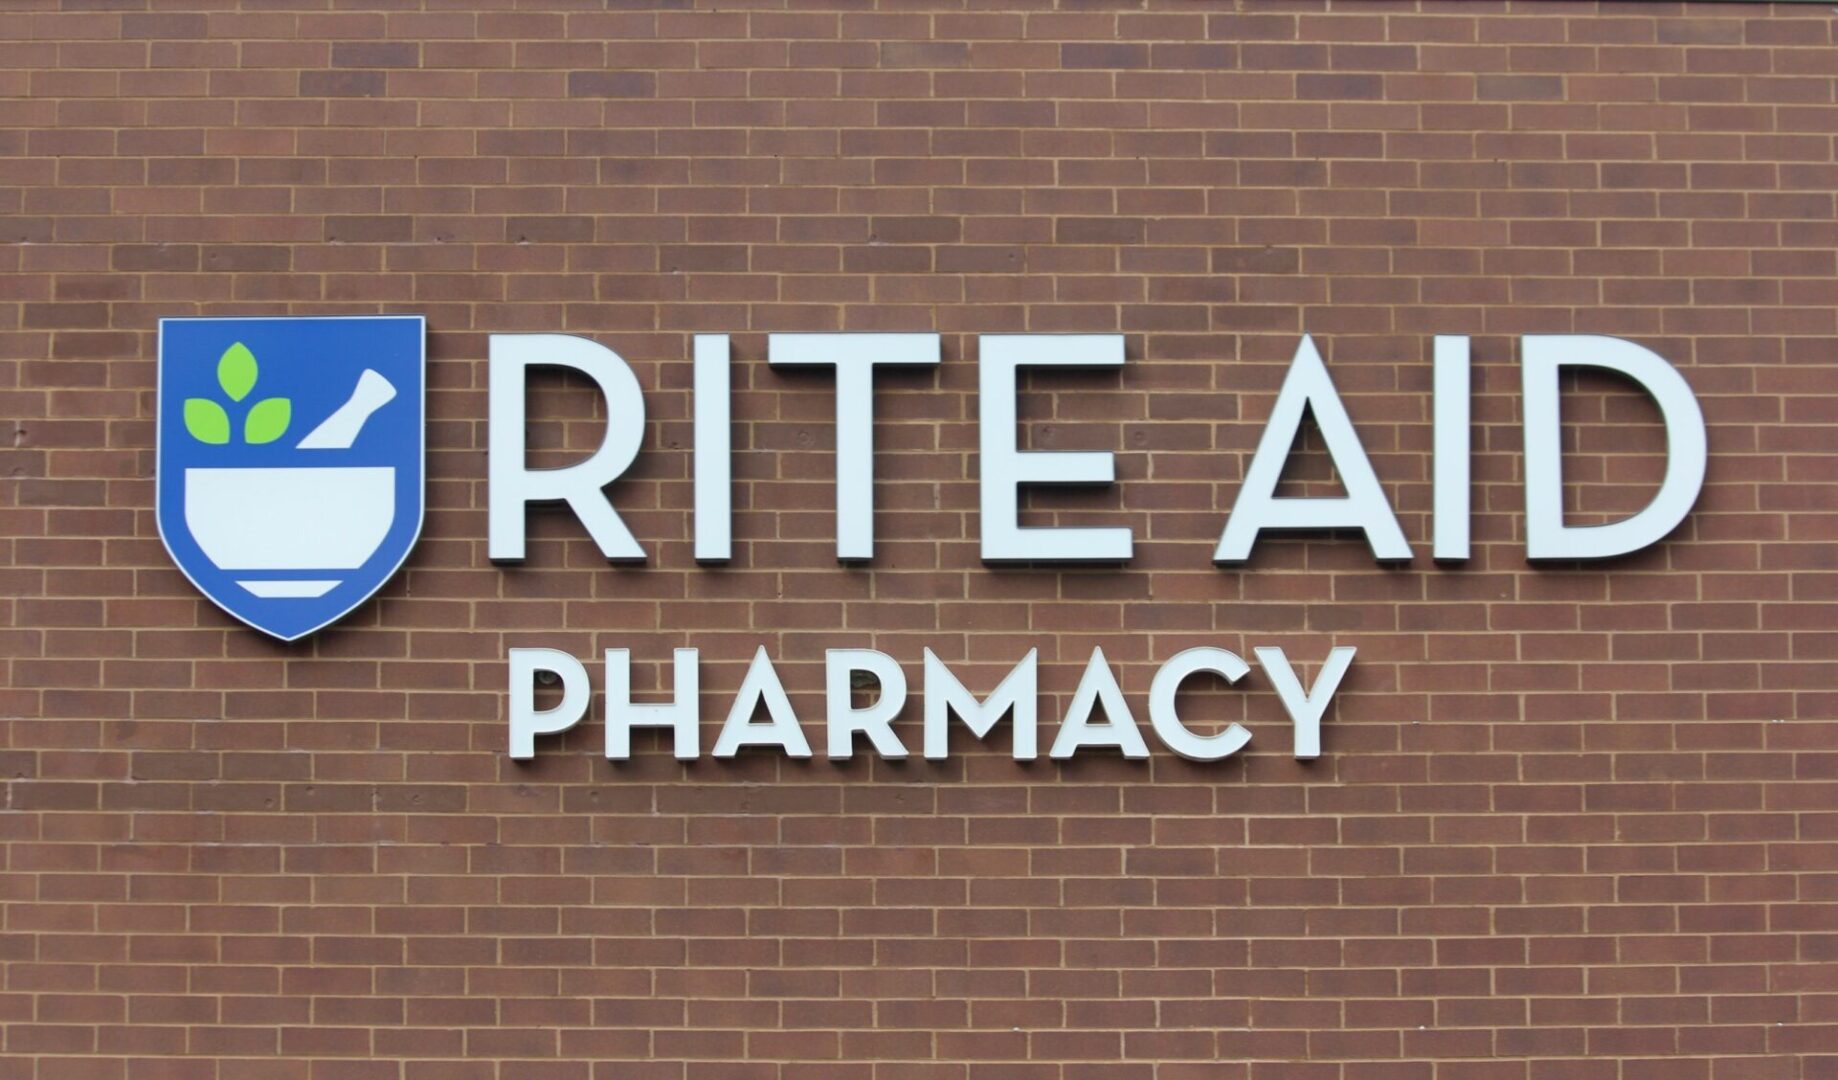 Pennsylvania-based pharmacy, Rite Aid, files for bankruptcy